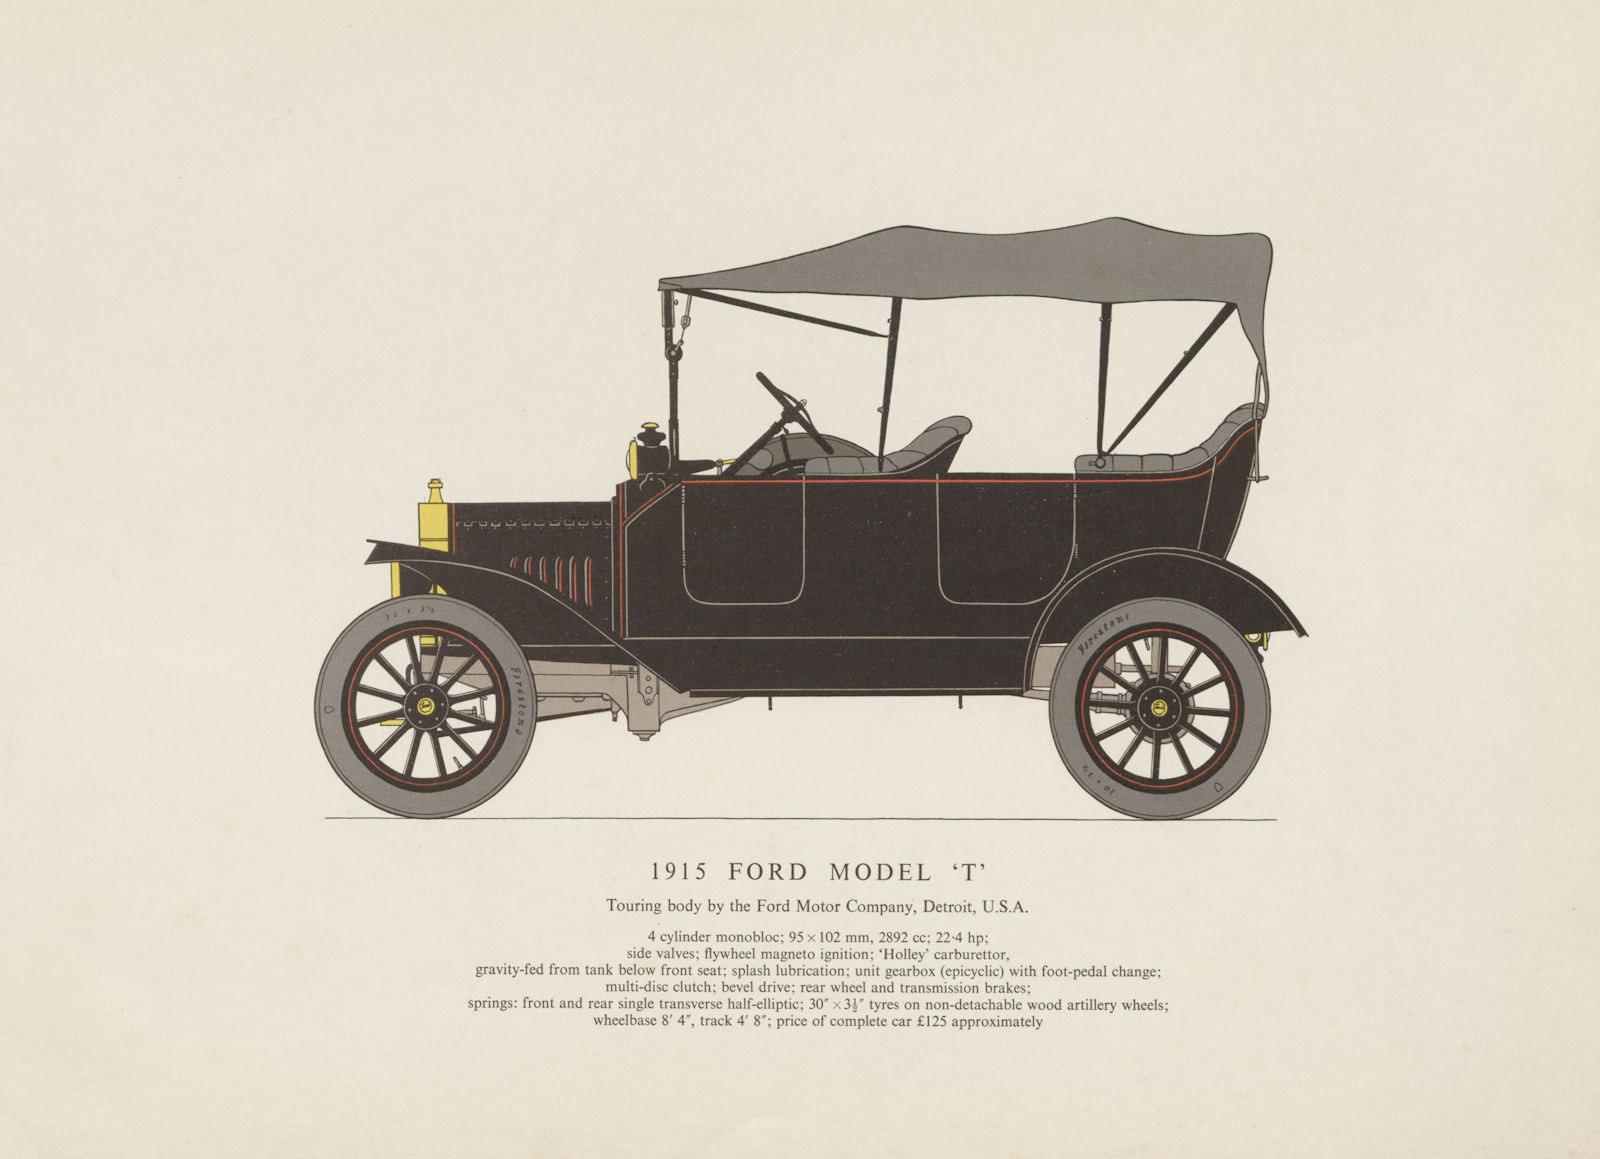 Model "T" Ford four-seat touring car (1915) motor car print. George Oliver 1959